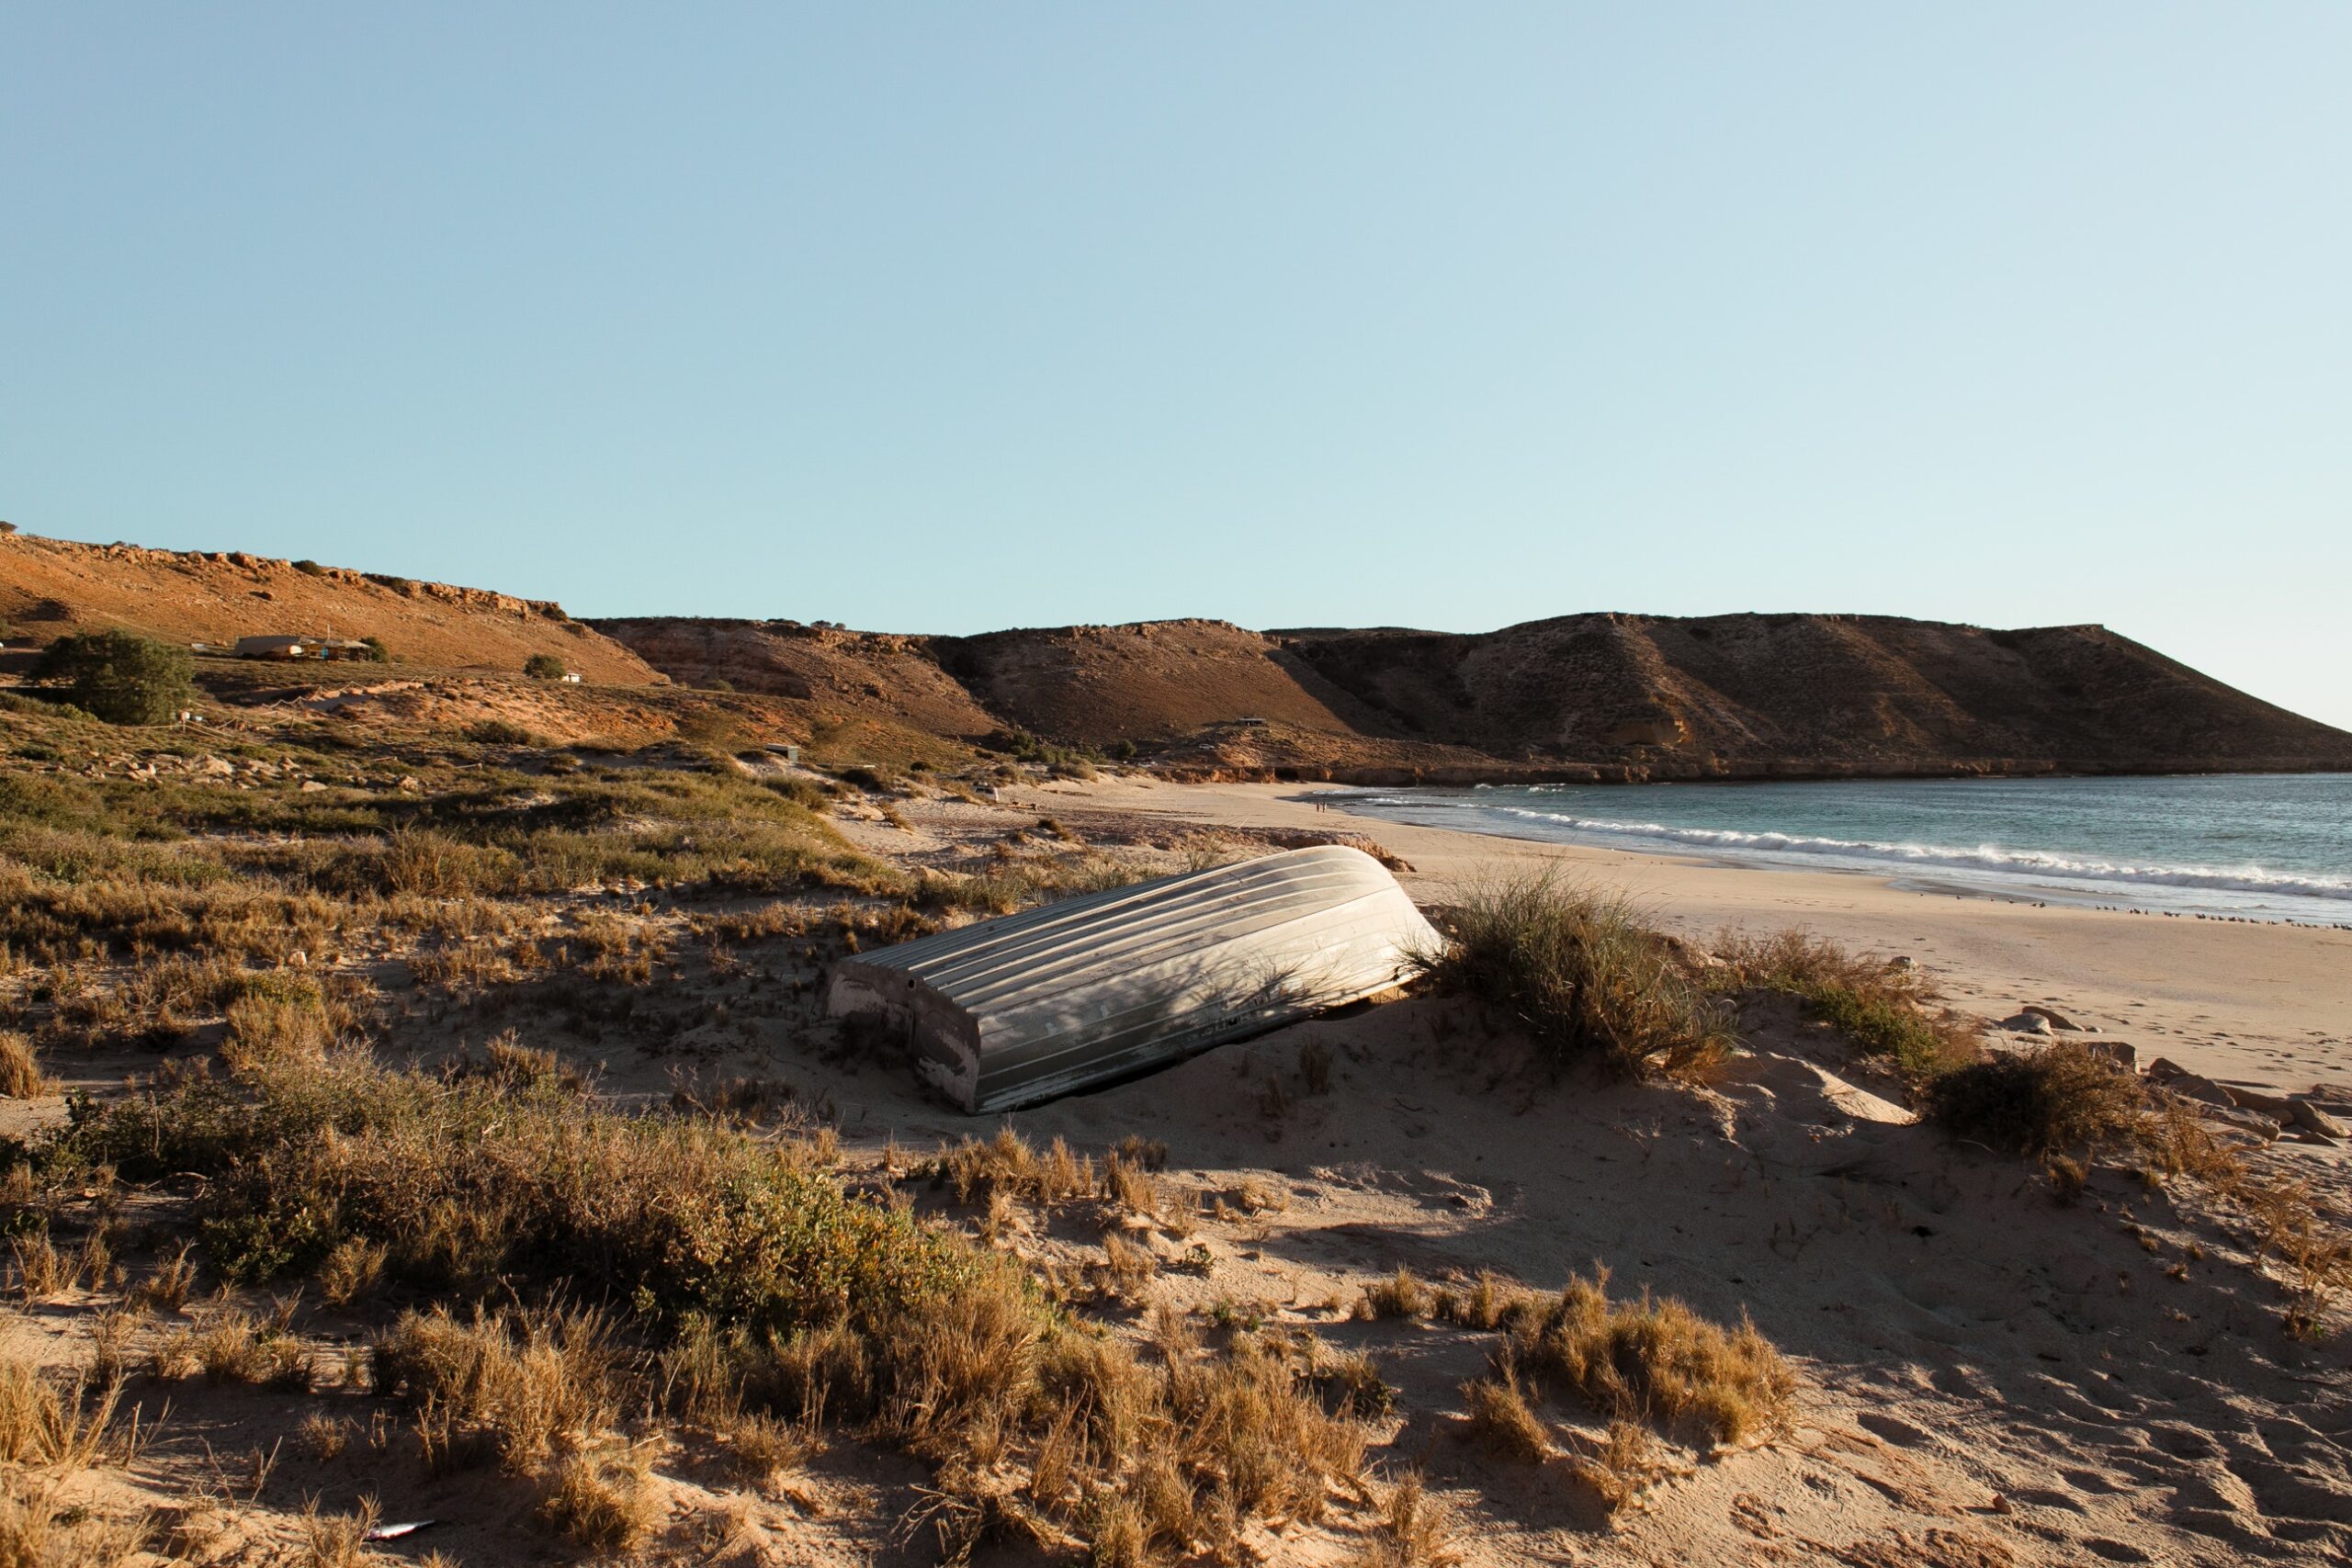 A flipped silver boat sits on a shore of dried grass and sand.